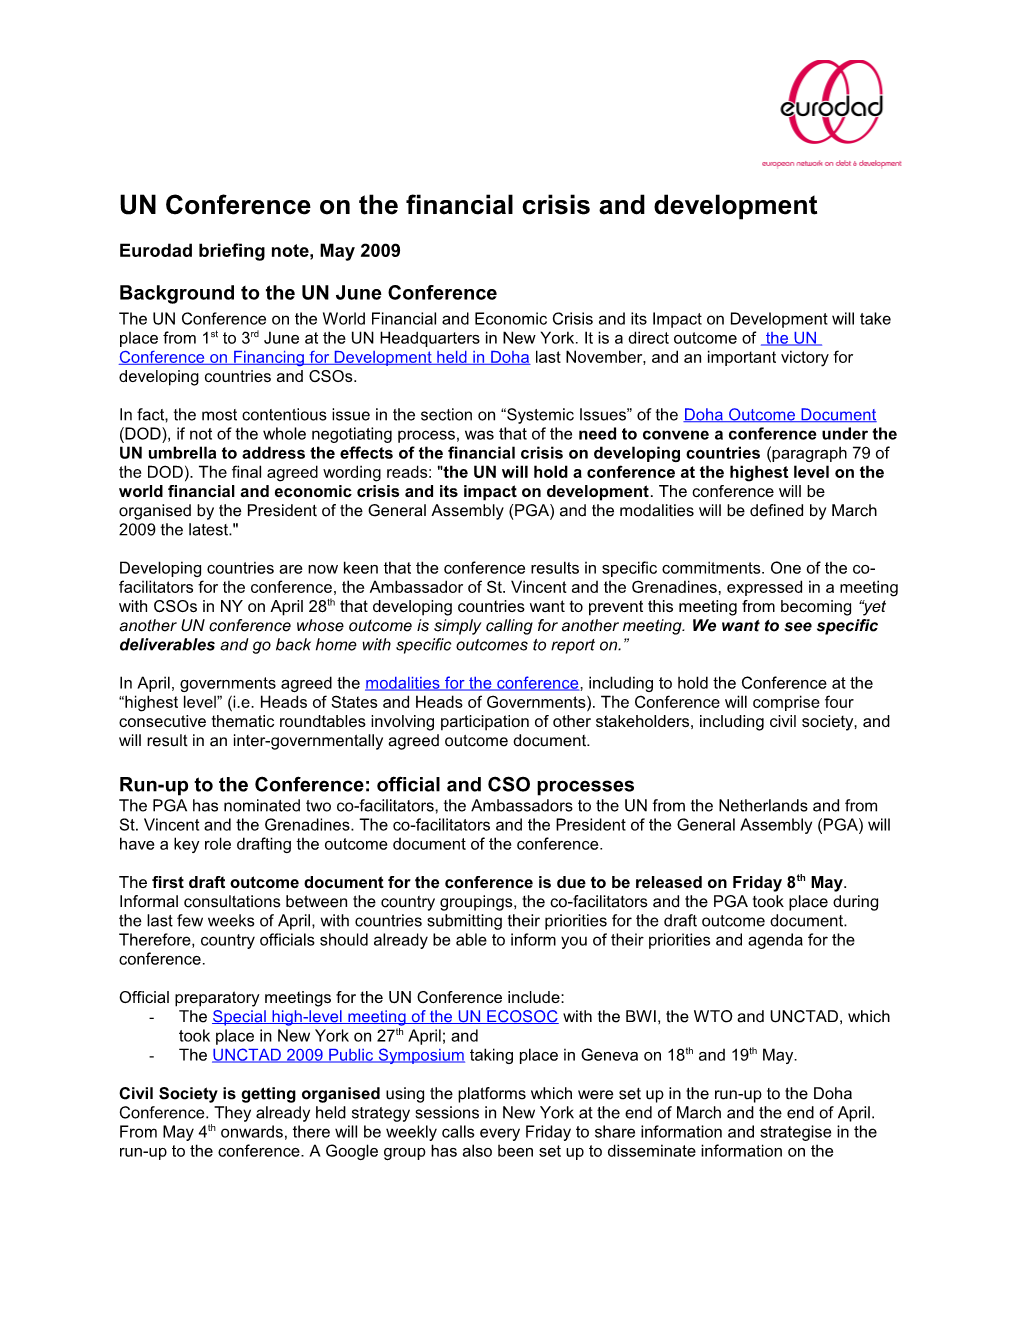 UN Conference on the Financial Crisis and Development